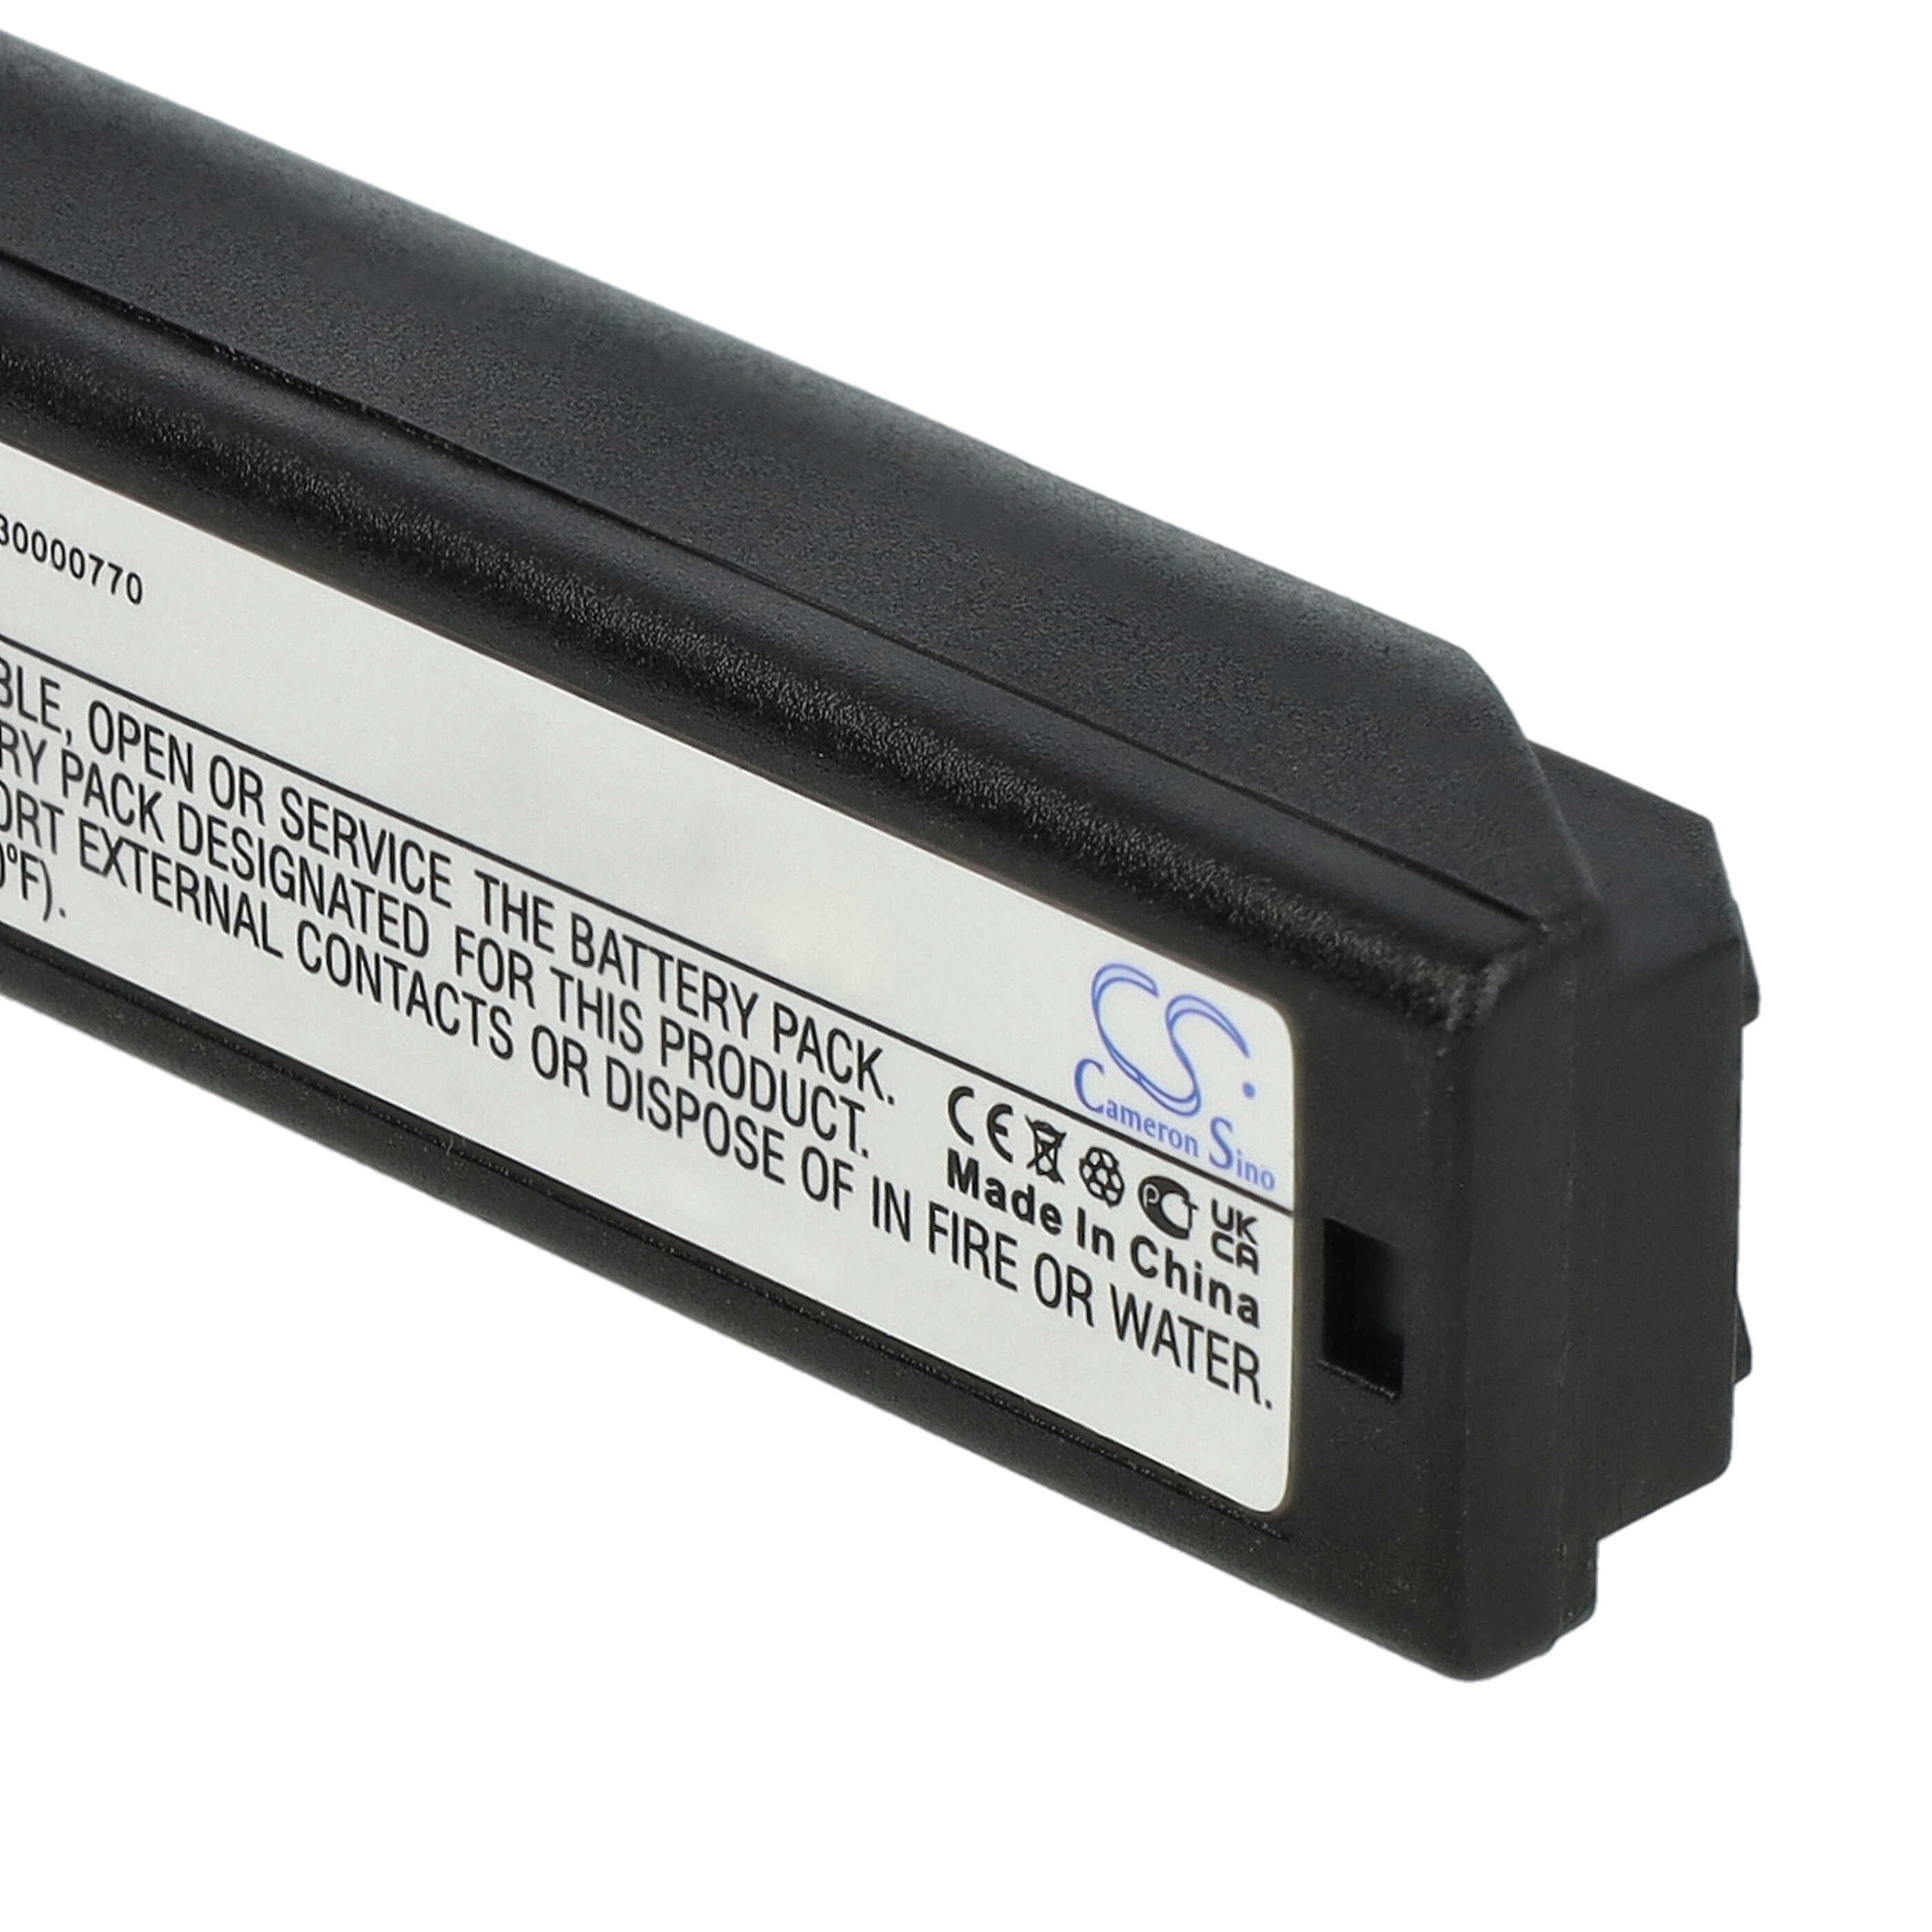 Barcode Scanner POS Battery Replacement for Honeywell 013283, 100006732, 100000495 - 2000 mAh 3.7 V Li-Ion